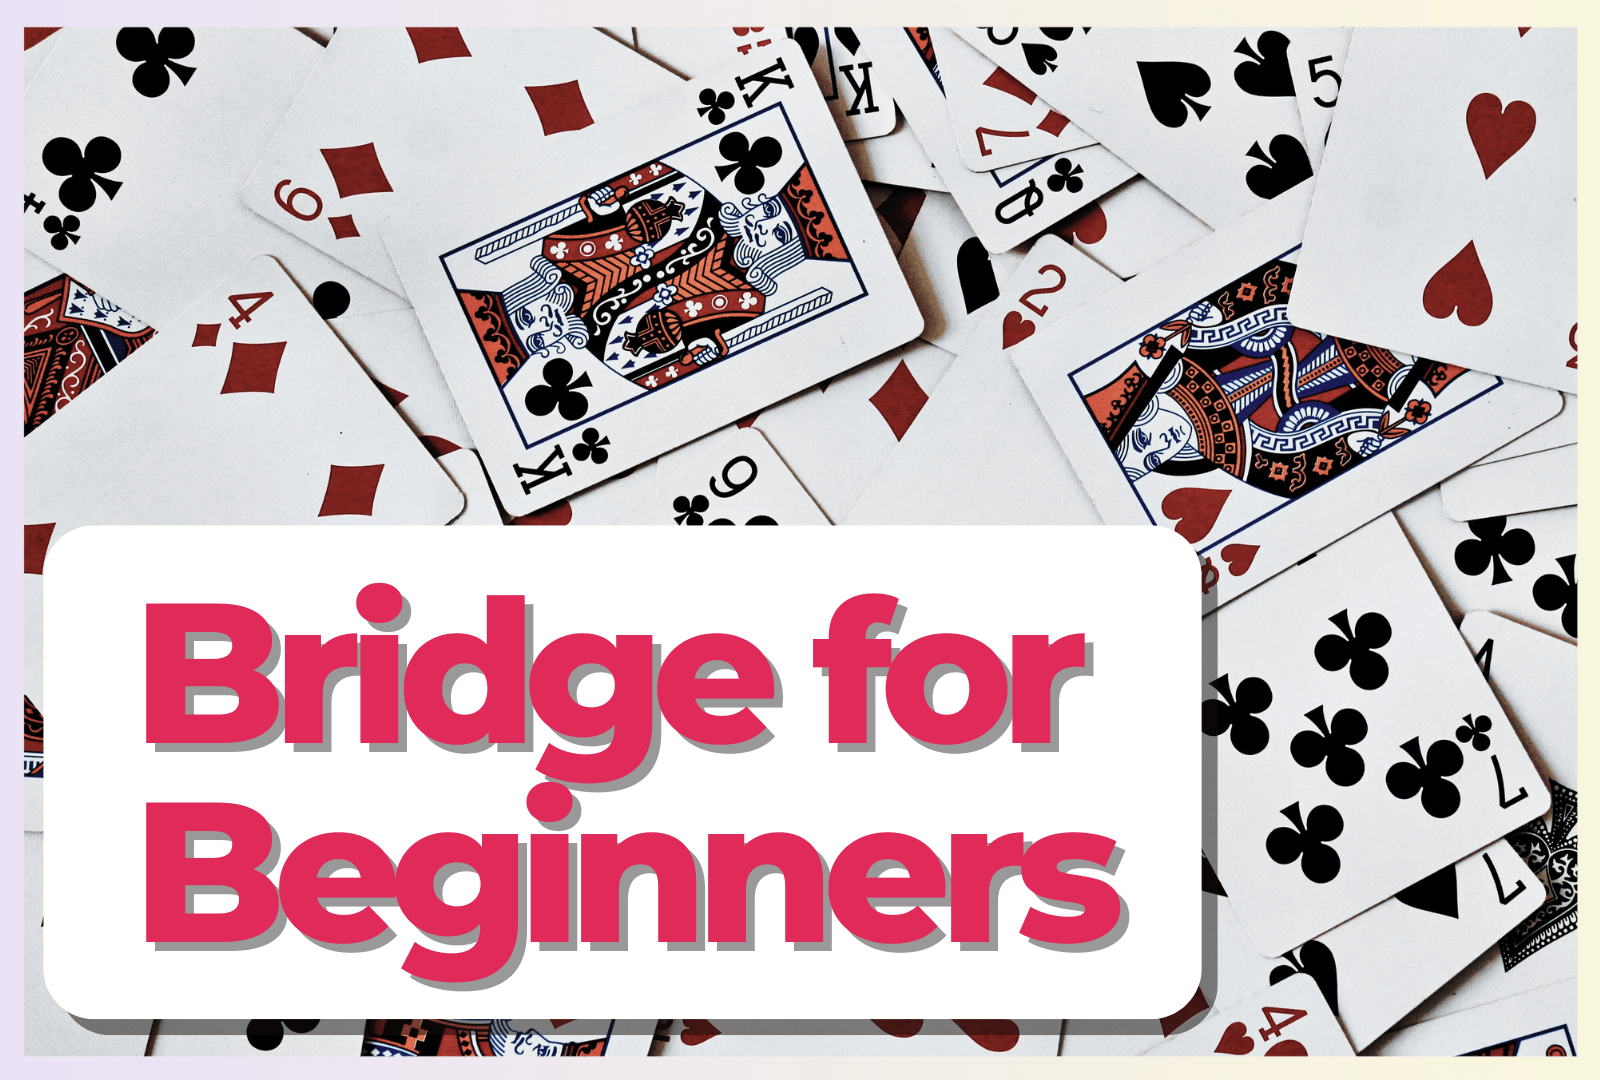 A pack of cards spread out on a surface with the text 'Bridge for Beginners' overlayed.